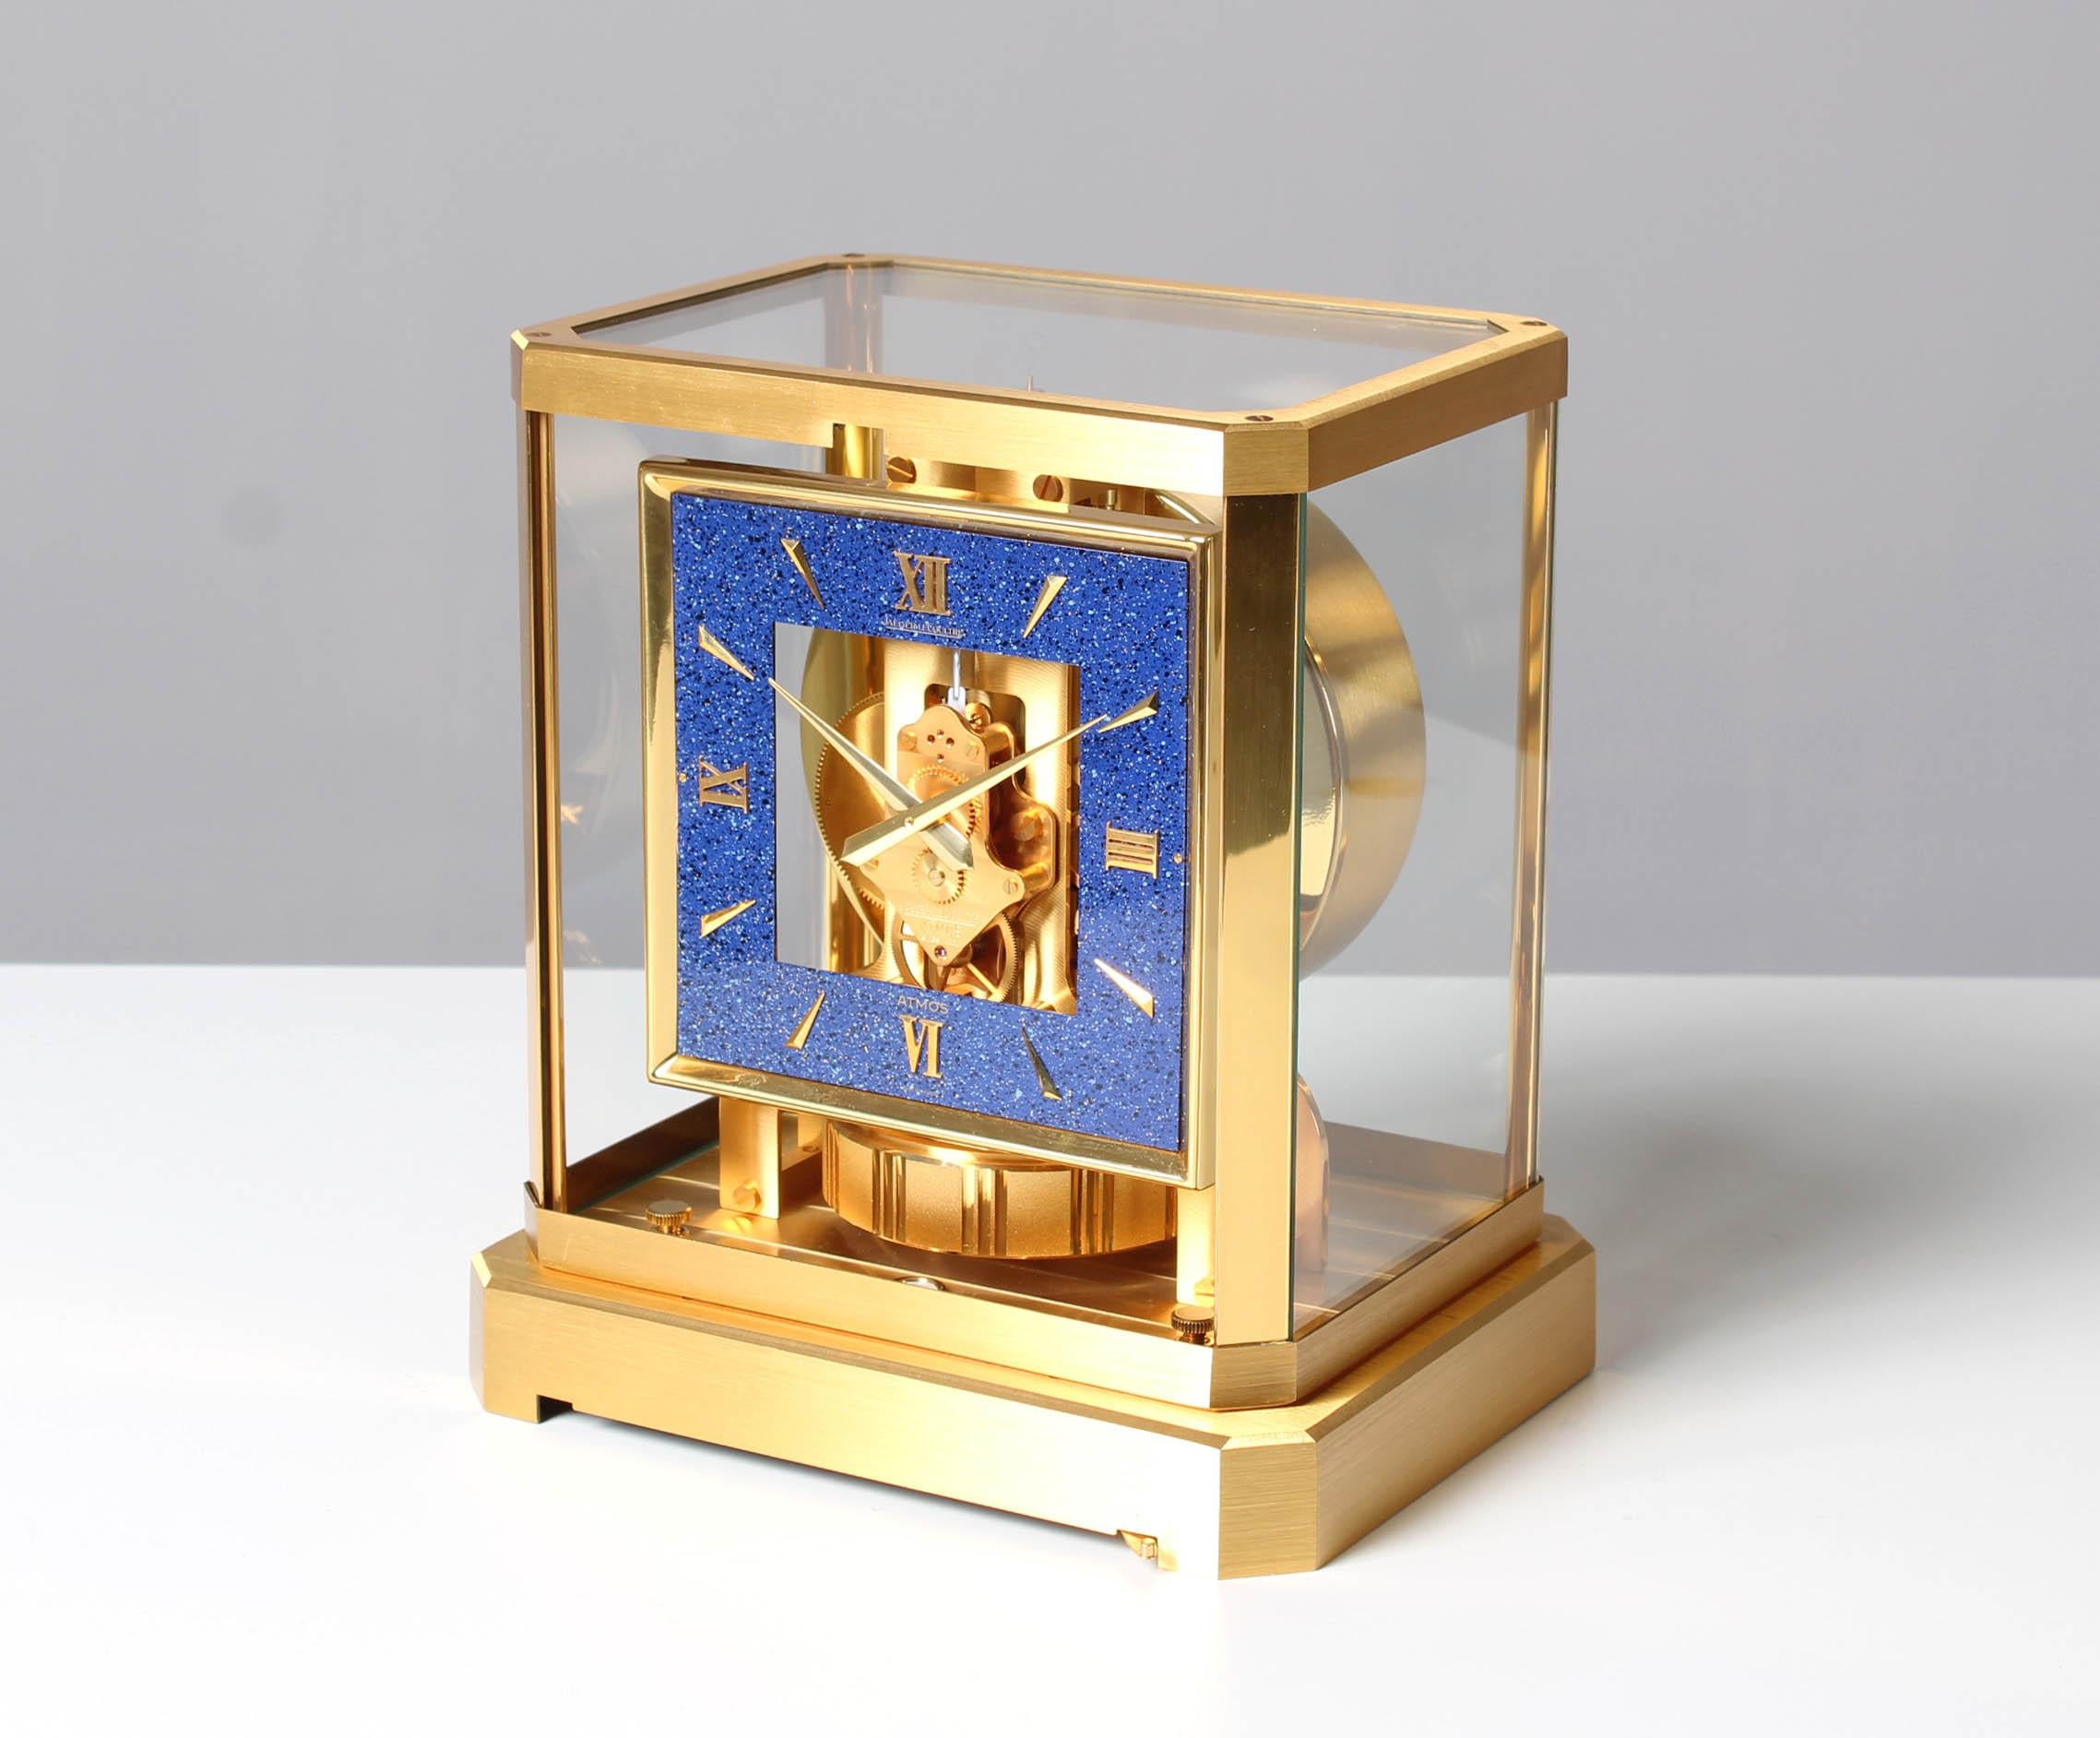 Switzerland
Brass gold plated
Year of manufacture 1979

Dimensions: H x W x D: 23 x 21 x 16 cm

Description:
Atmos VIII in matte brushed gold plated case with polished stands. Rotating pendulum with vertical milled stripes.
Square dial in